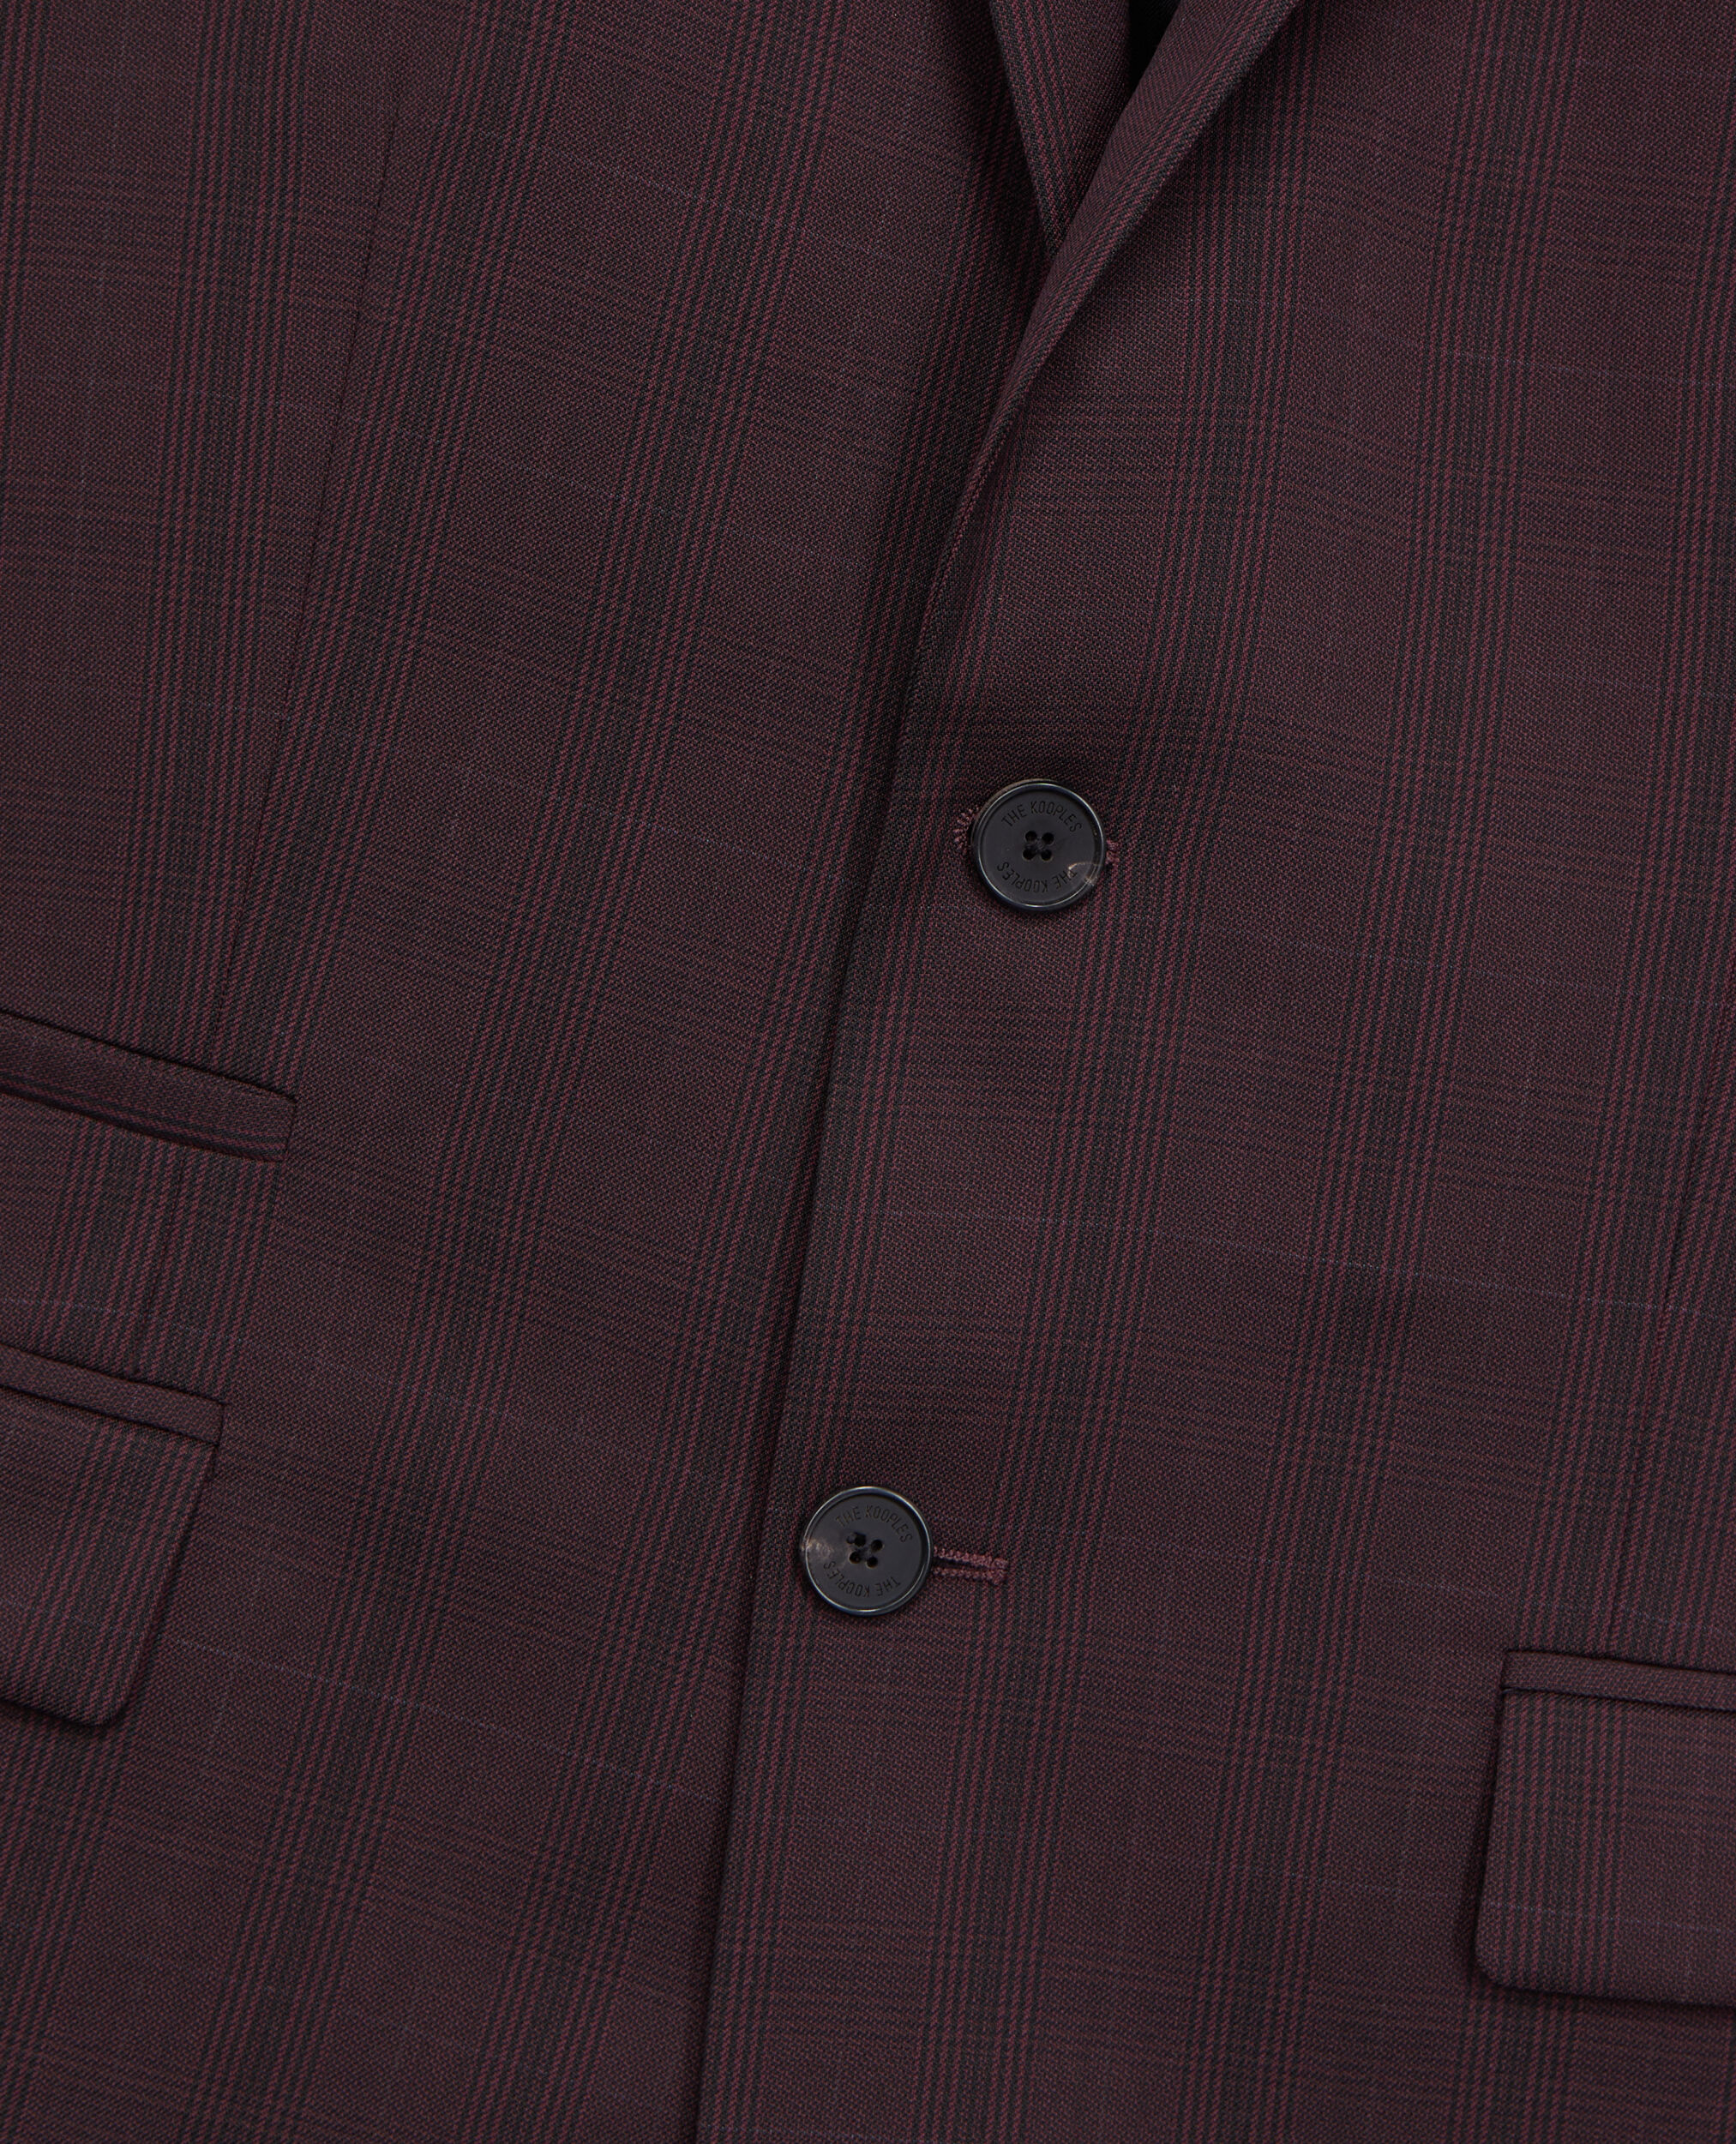 Burgundy checked wool suit jacket, BORDEAUX, hi-res image number null